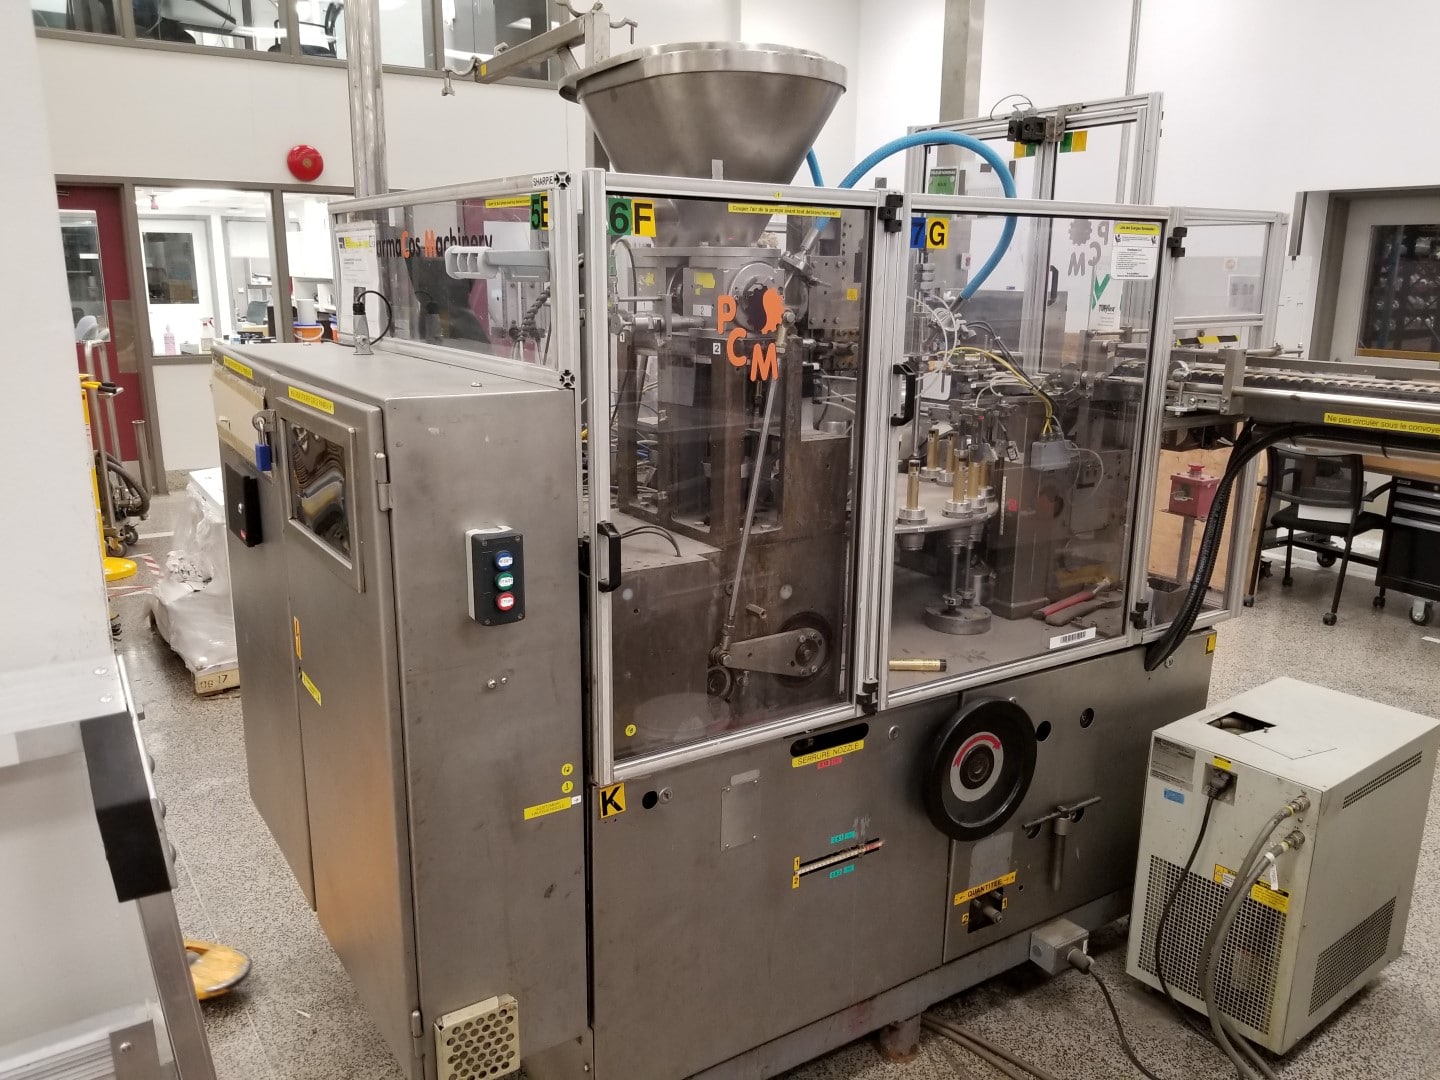 Used IWKA TU200P plastic tube filler with TZ101 tube feeder and LARGE cabinet with MANY parts